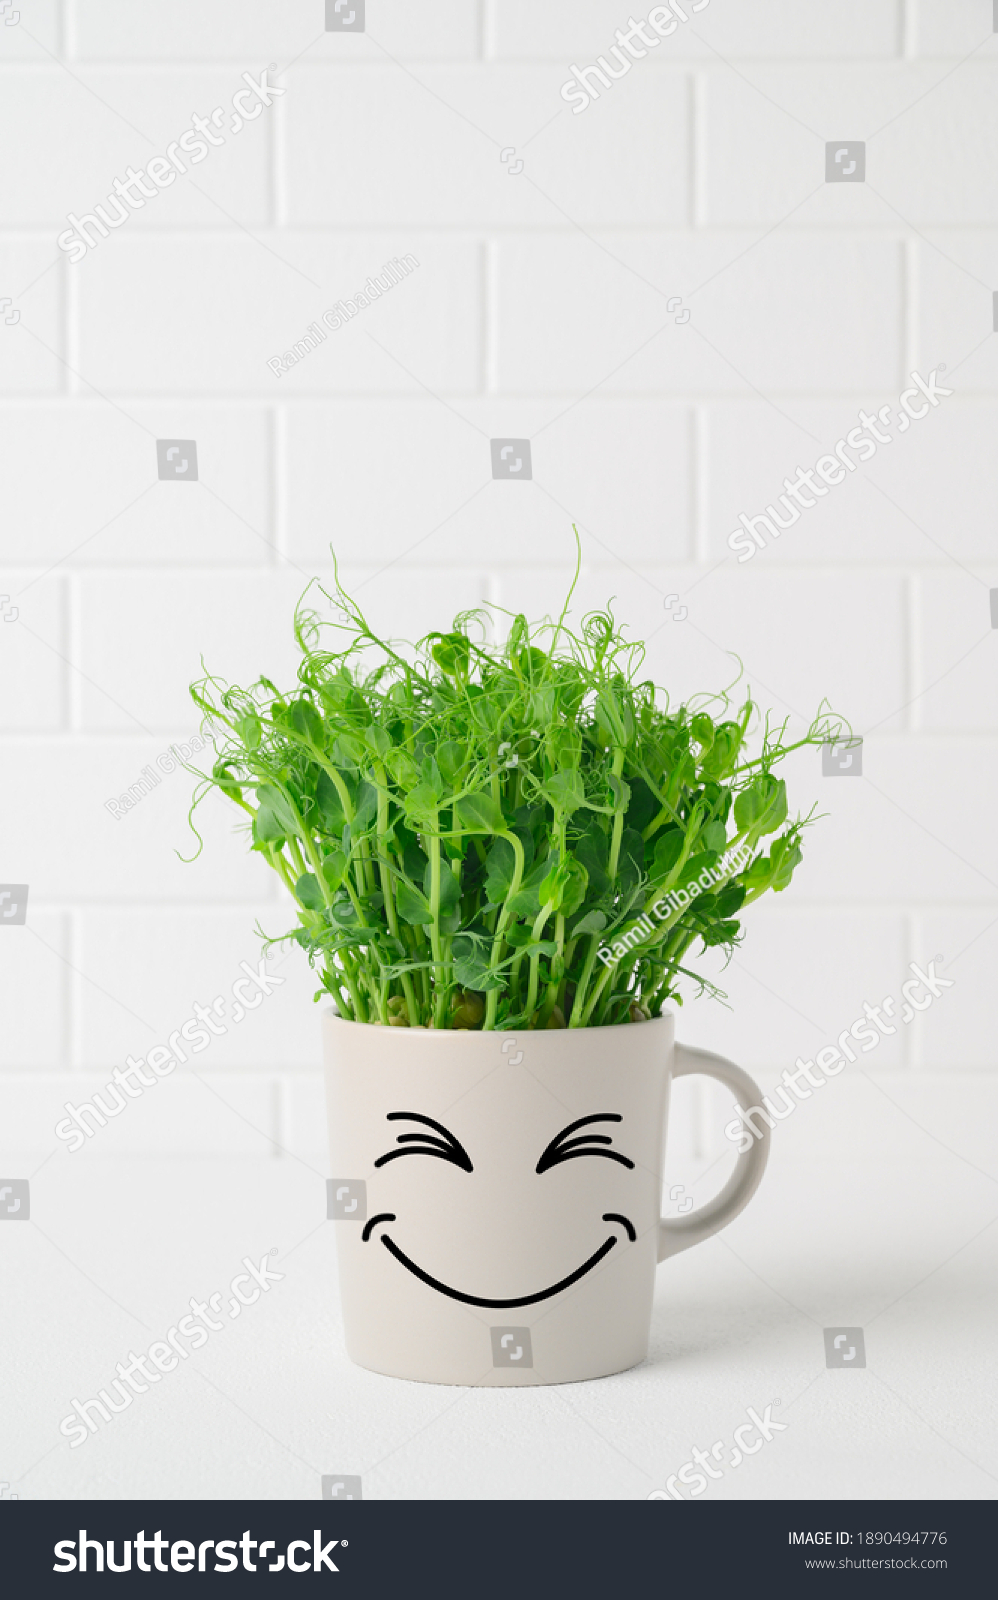 Gray mug with funny face in which grows pea microgreens on background white brick wall. Funny flower pot with a smiley face stands on table. Springtime home gardening concept. Copy space #1890494776